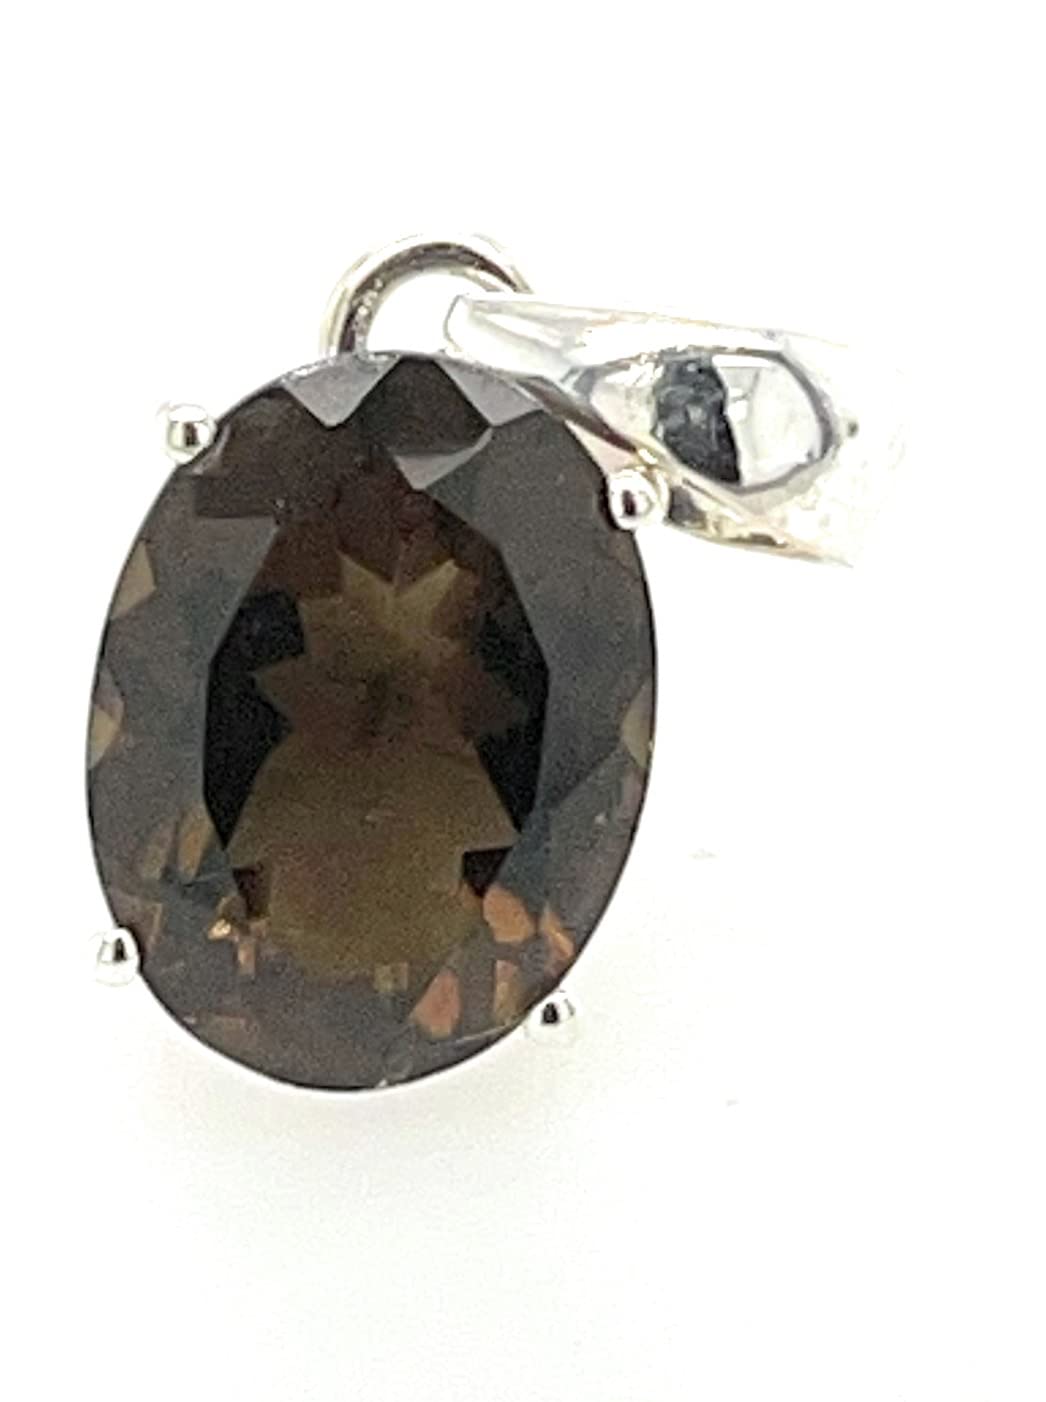 Genuine 20ct Smoky Topaz 925 Solid Sterling Silver Pendant 40mm - Natural Rocks by Kala